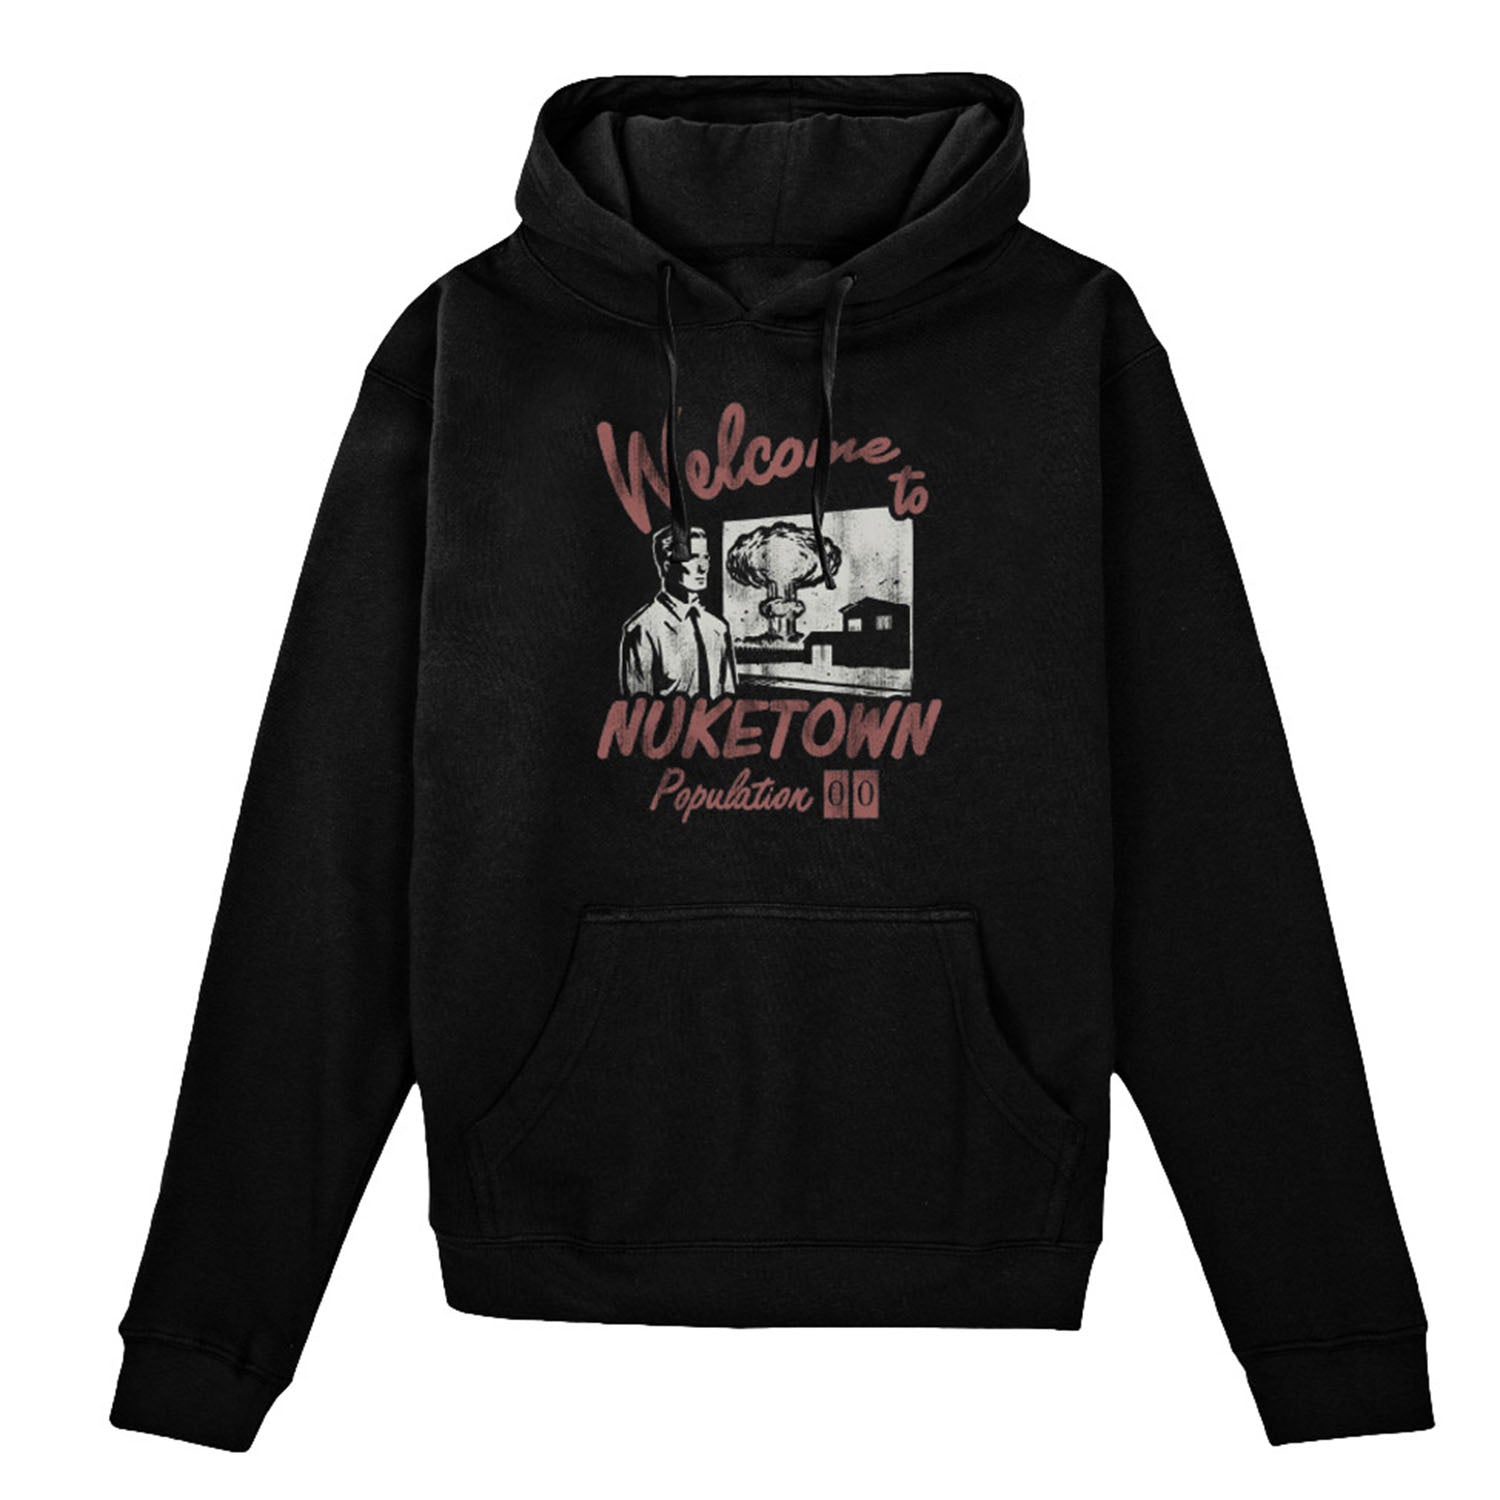 Call of Duty Nuketown Mannequin Black Hoodie - Front View